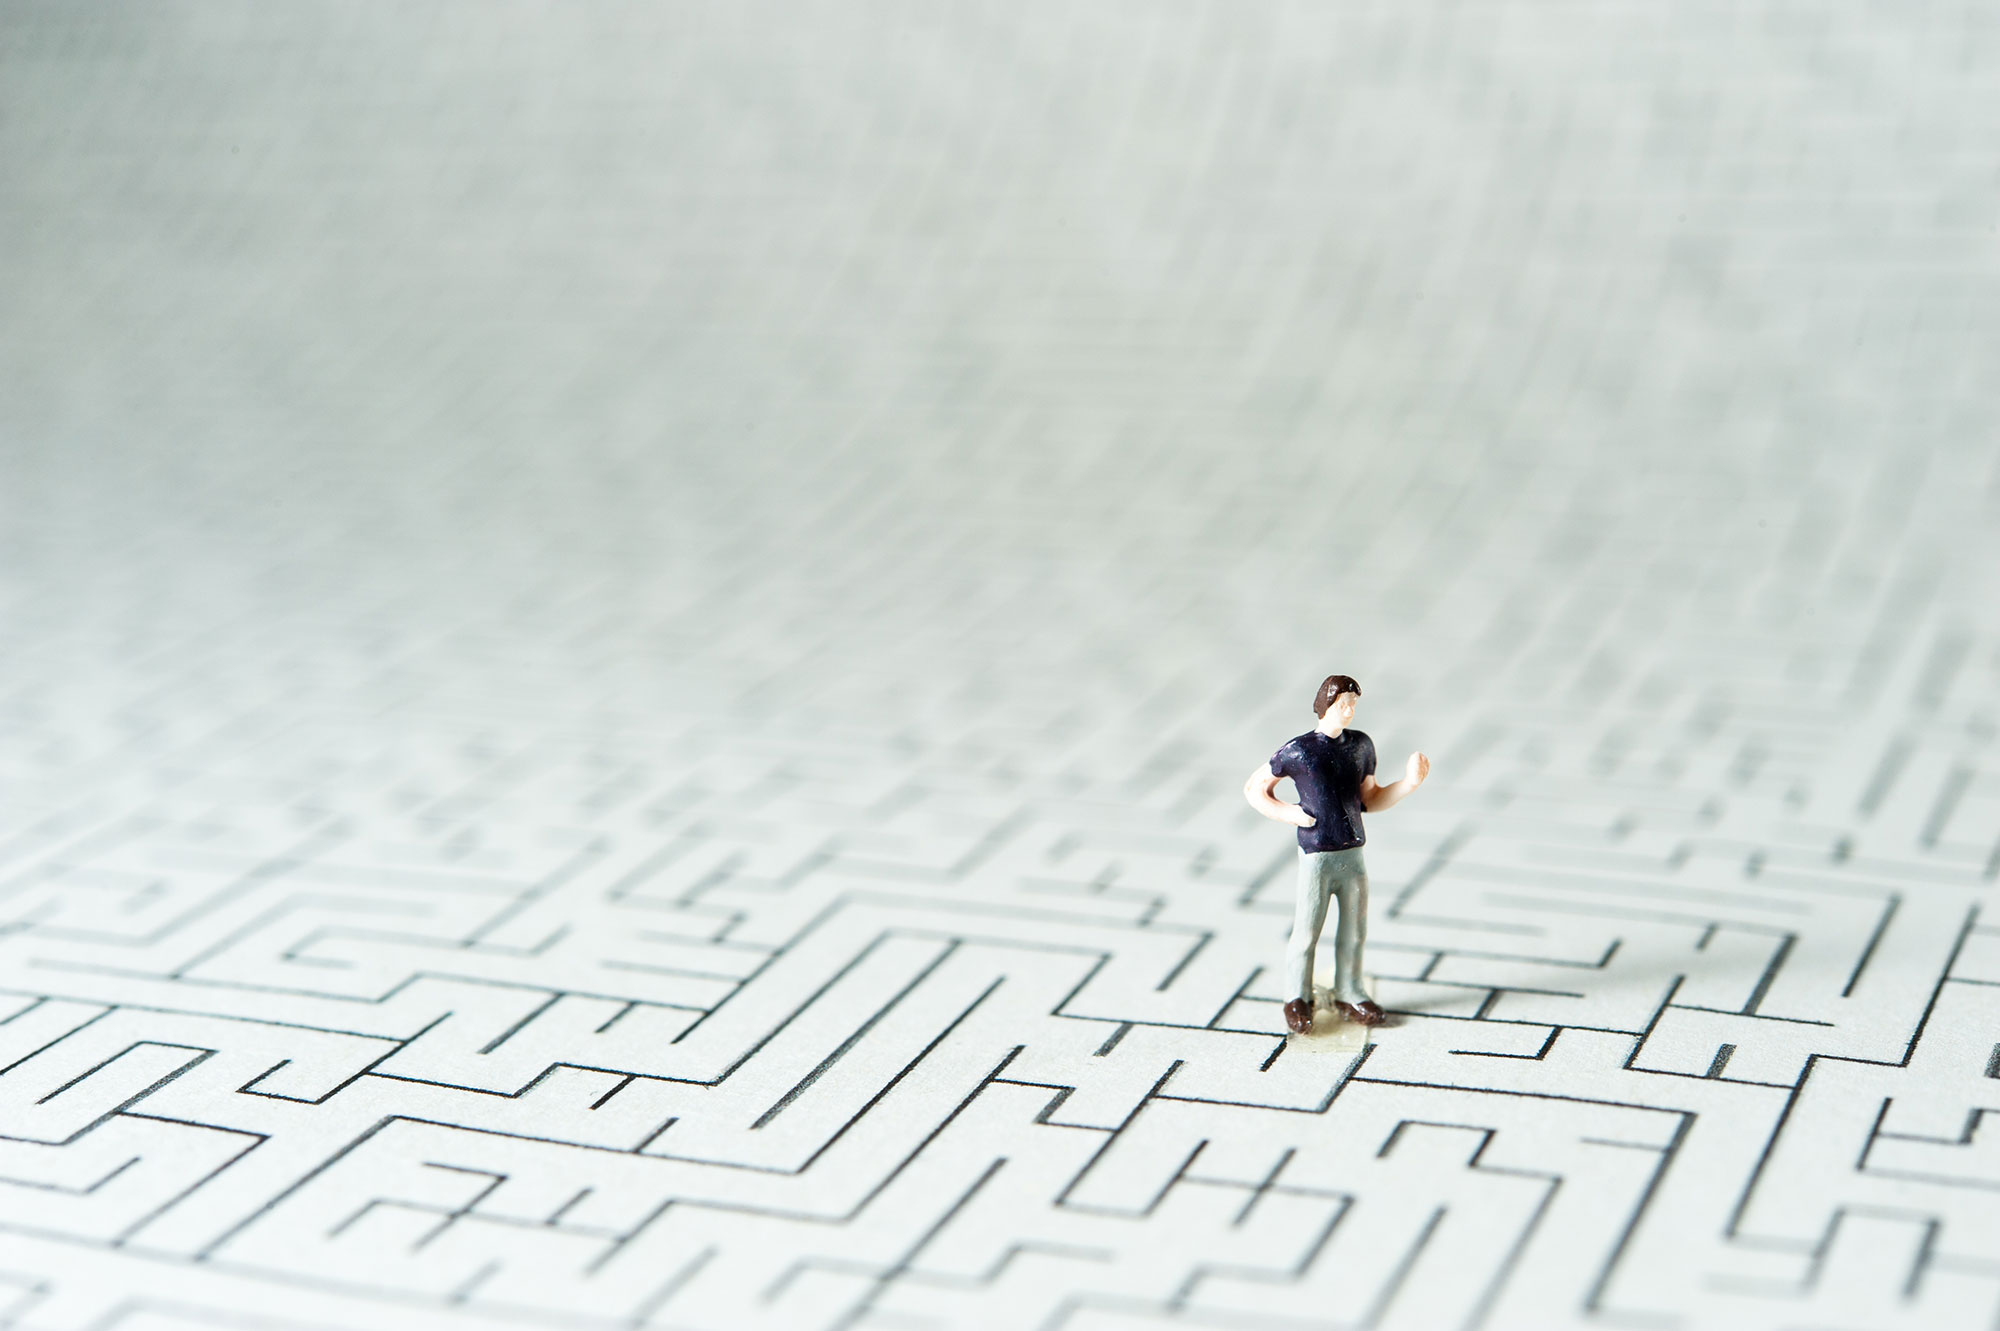 Person figurine on a drawn maze on paper